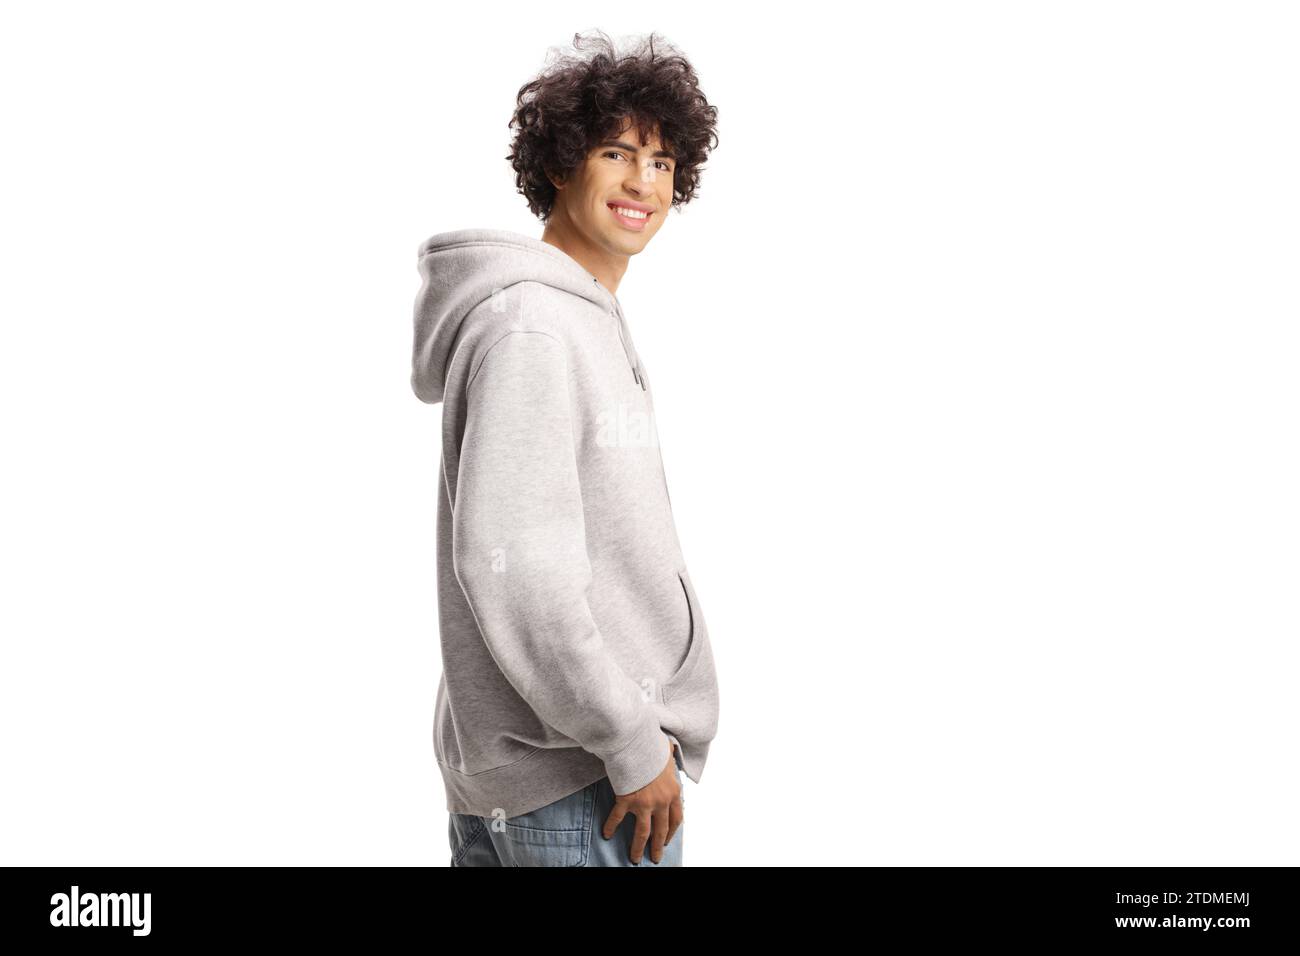 Guy with curly hair in a gray hoodie smiling isolated on white background Stock Photo